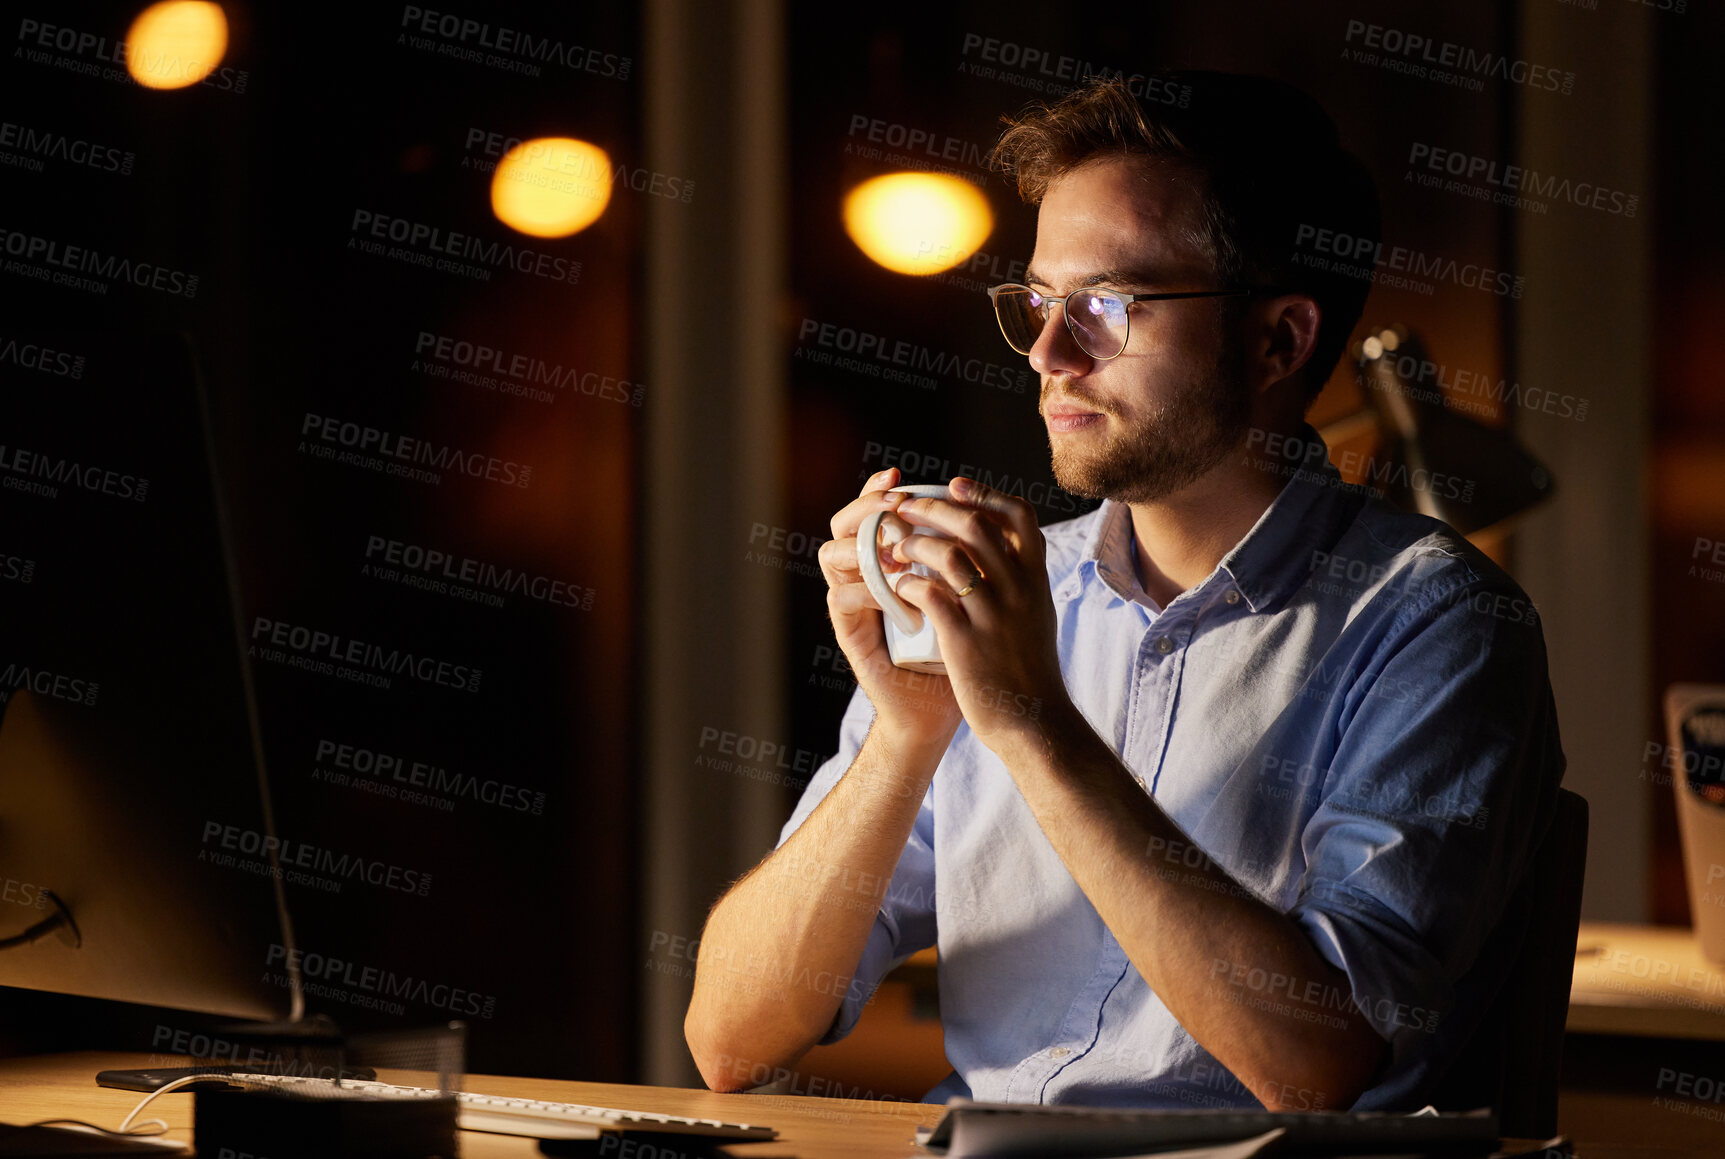 Buy stock photo Shot of a young businessman drinking coffee while working on a computer in an office at night